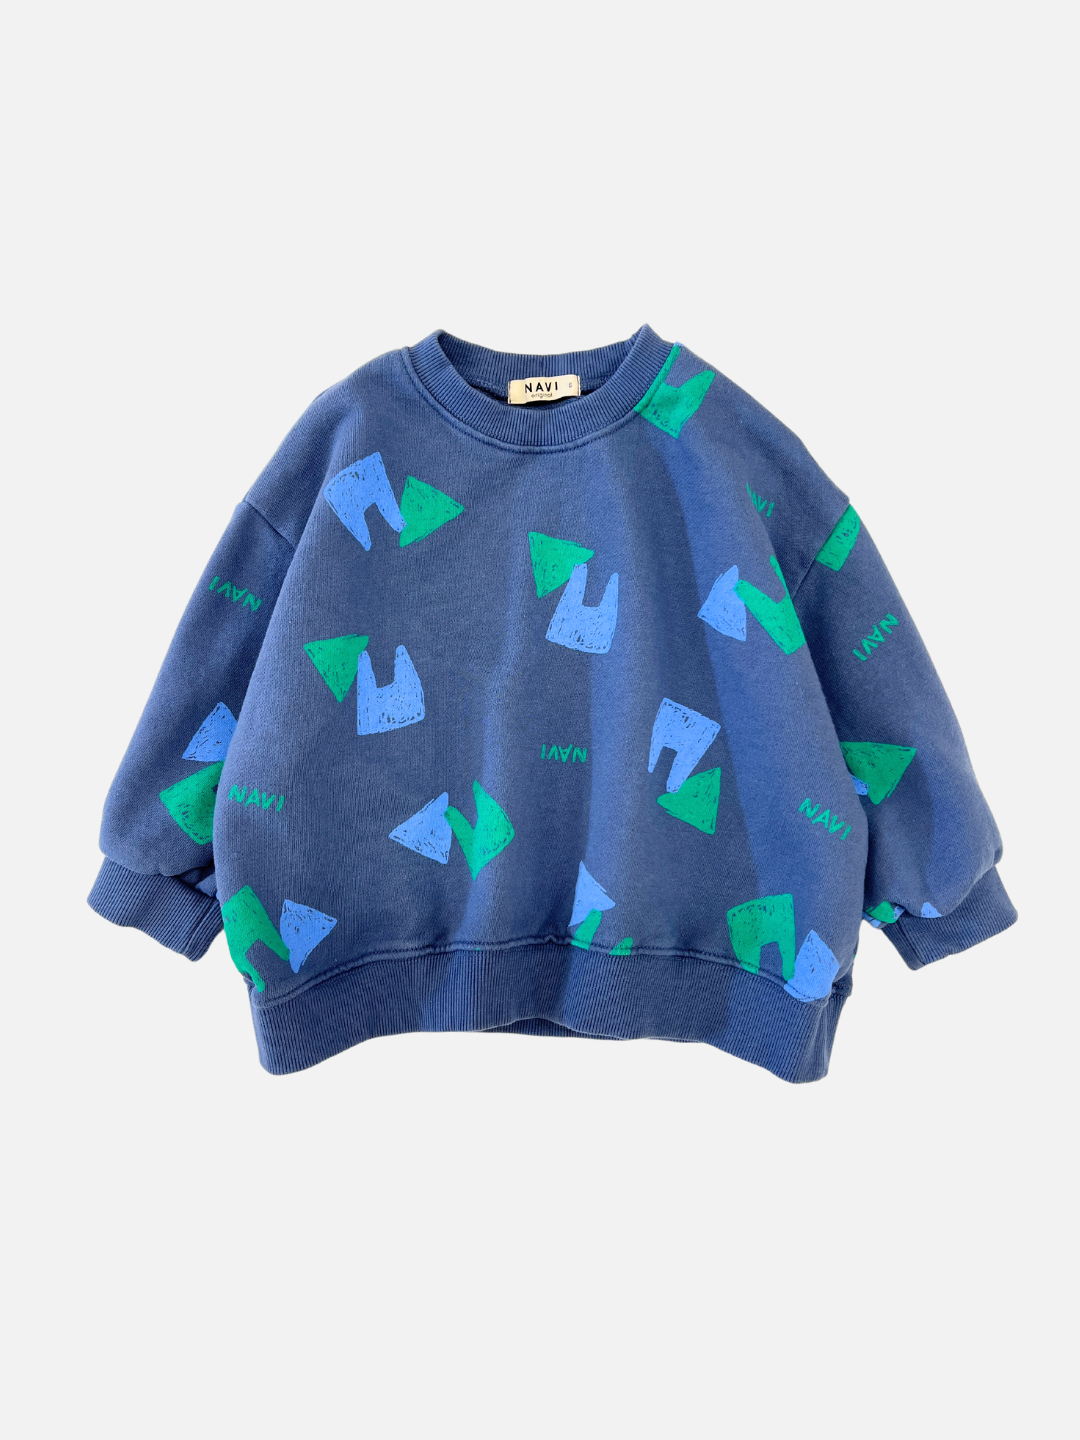 Vintage Blue | Front view of kids blue crewneck sweatshirt with an all over pattern of green and blue shapes and the brand name Navi.